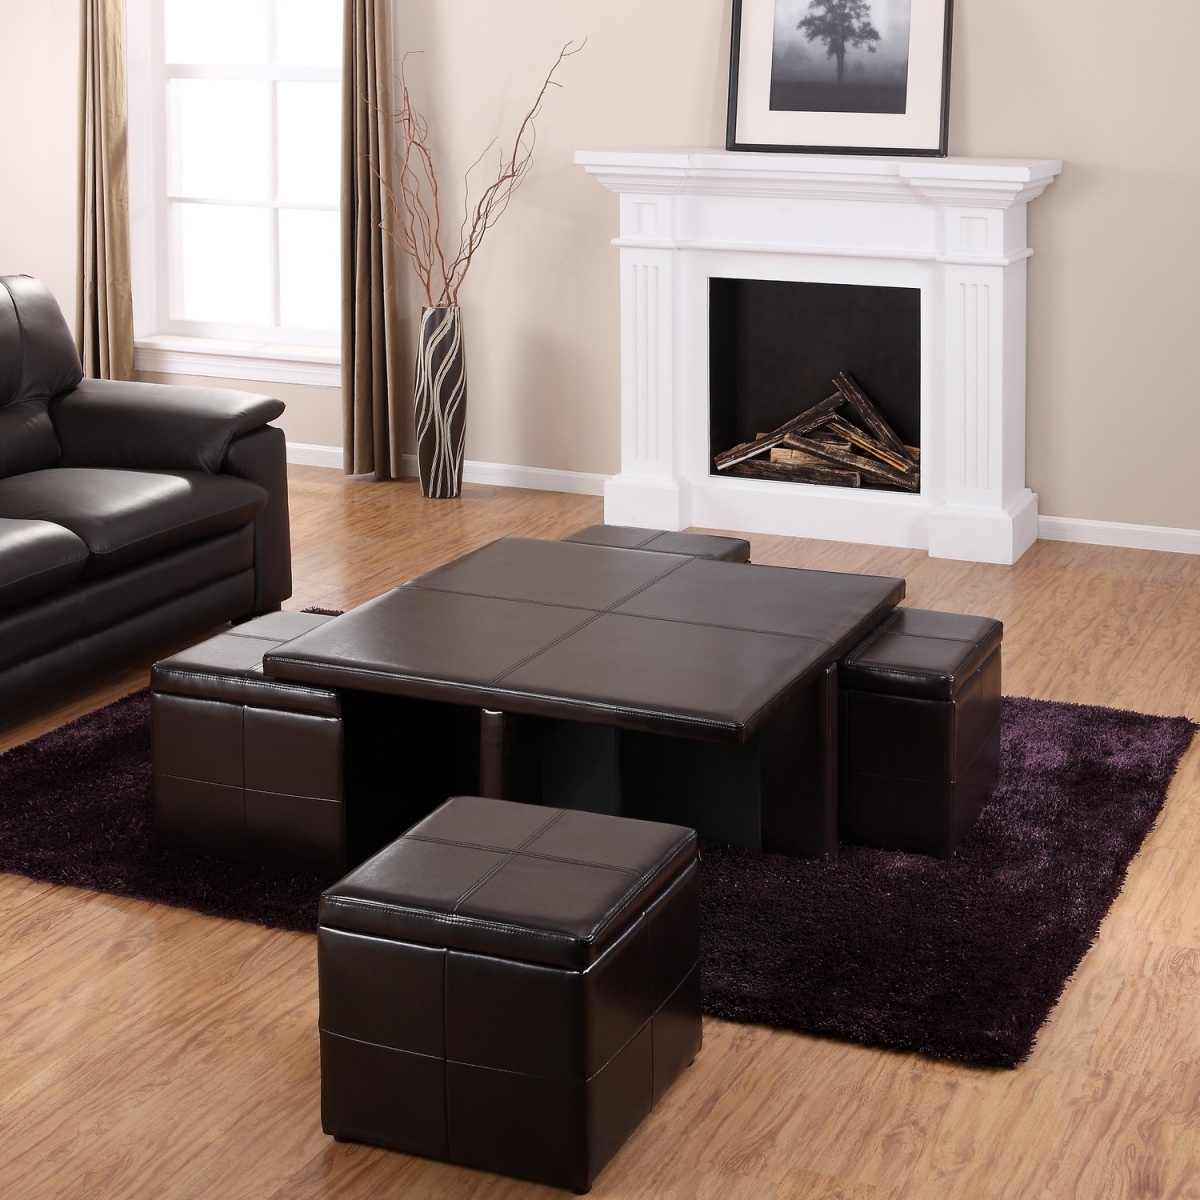 Table ottoman along with black leather ottoman chair and black